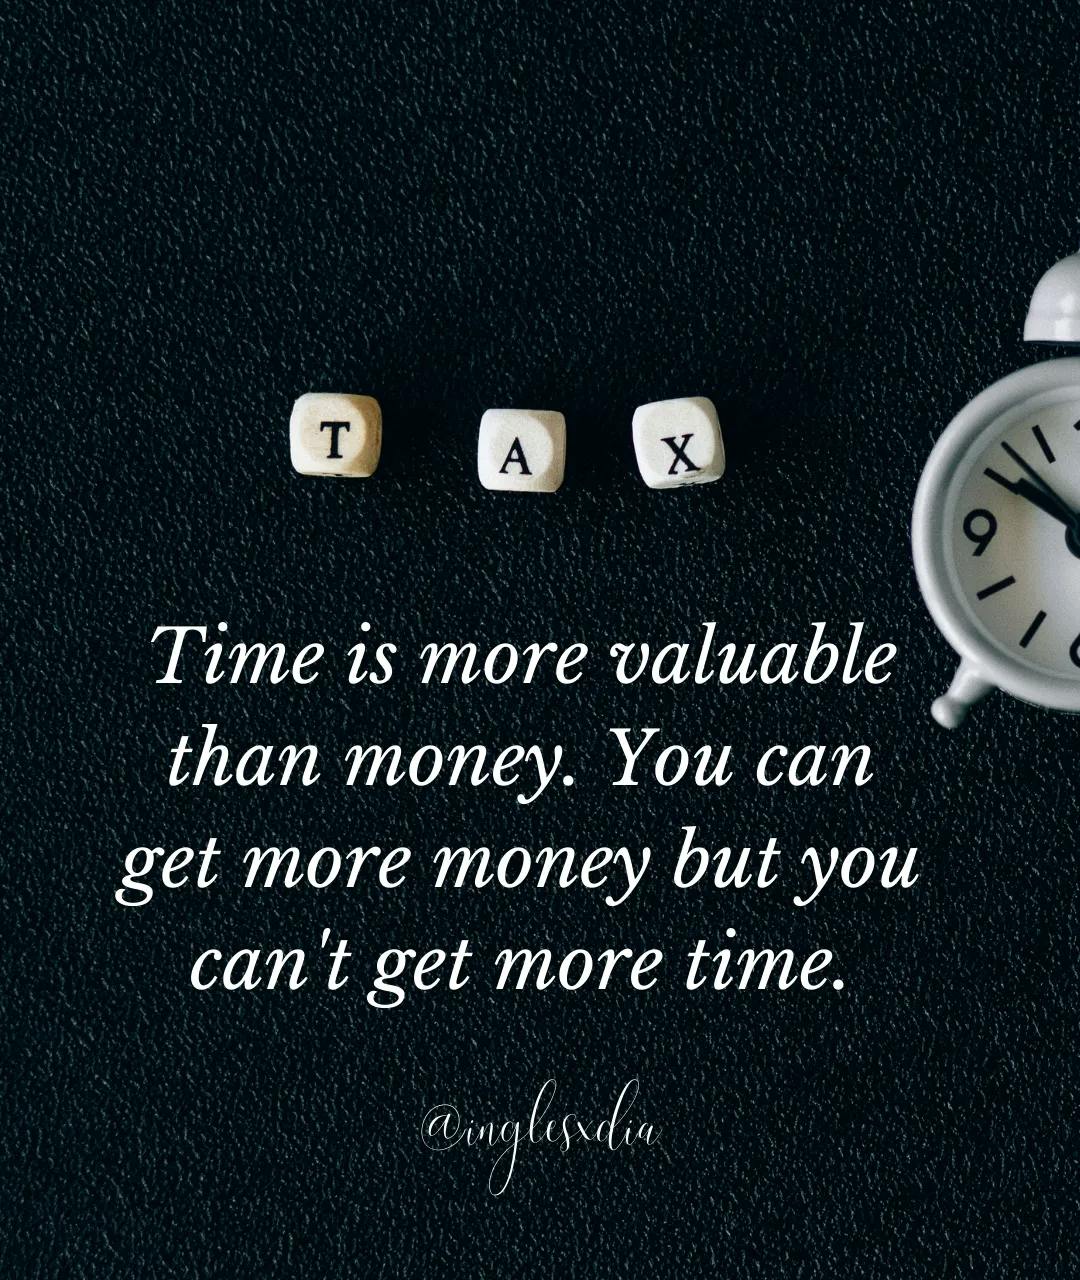 Frases motivadoras en inglés: Time is more valuable than money. You can get more money but you can't get more time.